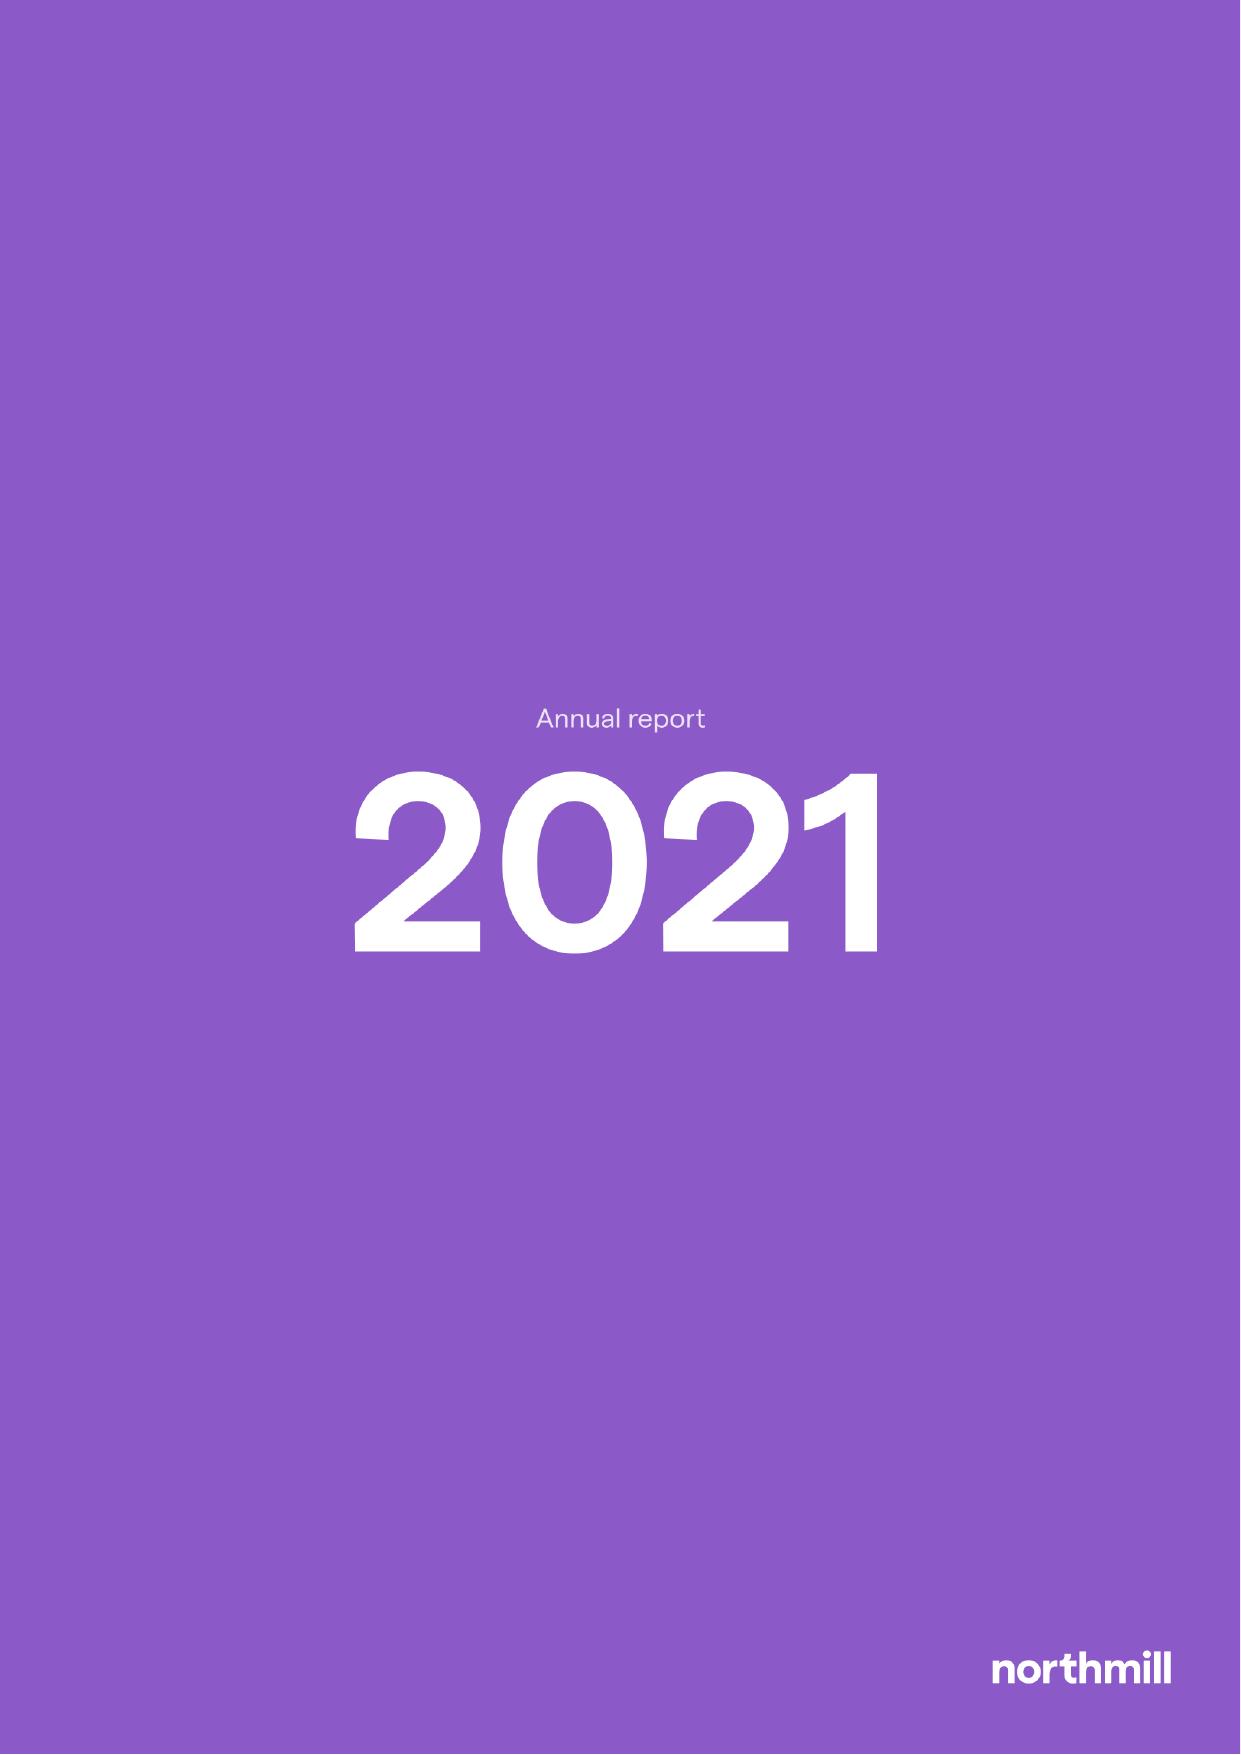 NORTHMILL 2021 Annual Report